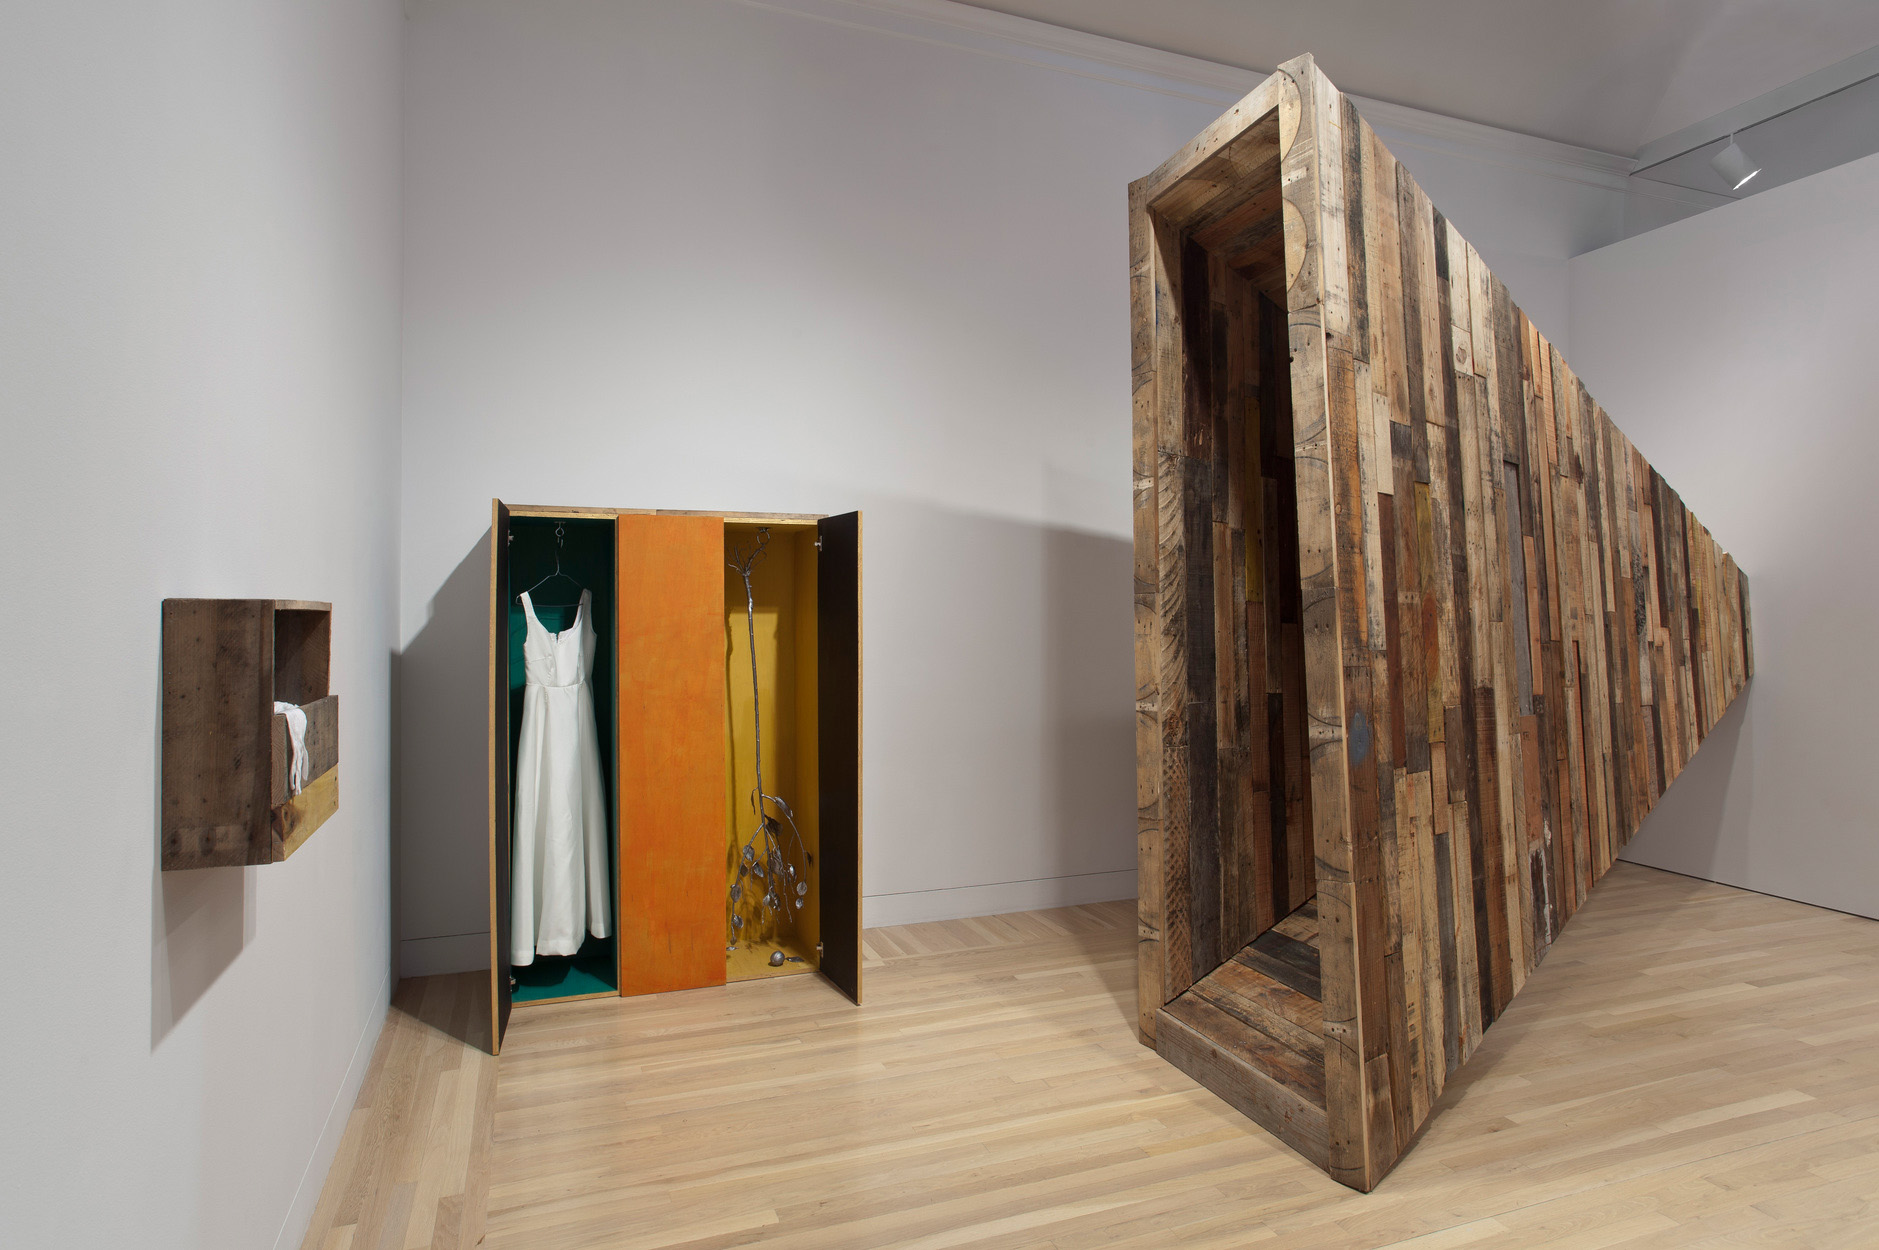 Liz Glynn, <em>Made in LA 2012</em>, 2012. Installation view at the Hammer Museum, Los Angeles. Photo: Brian Forrest. Courtesy of the Hammer Museum.